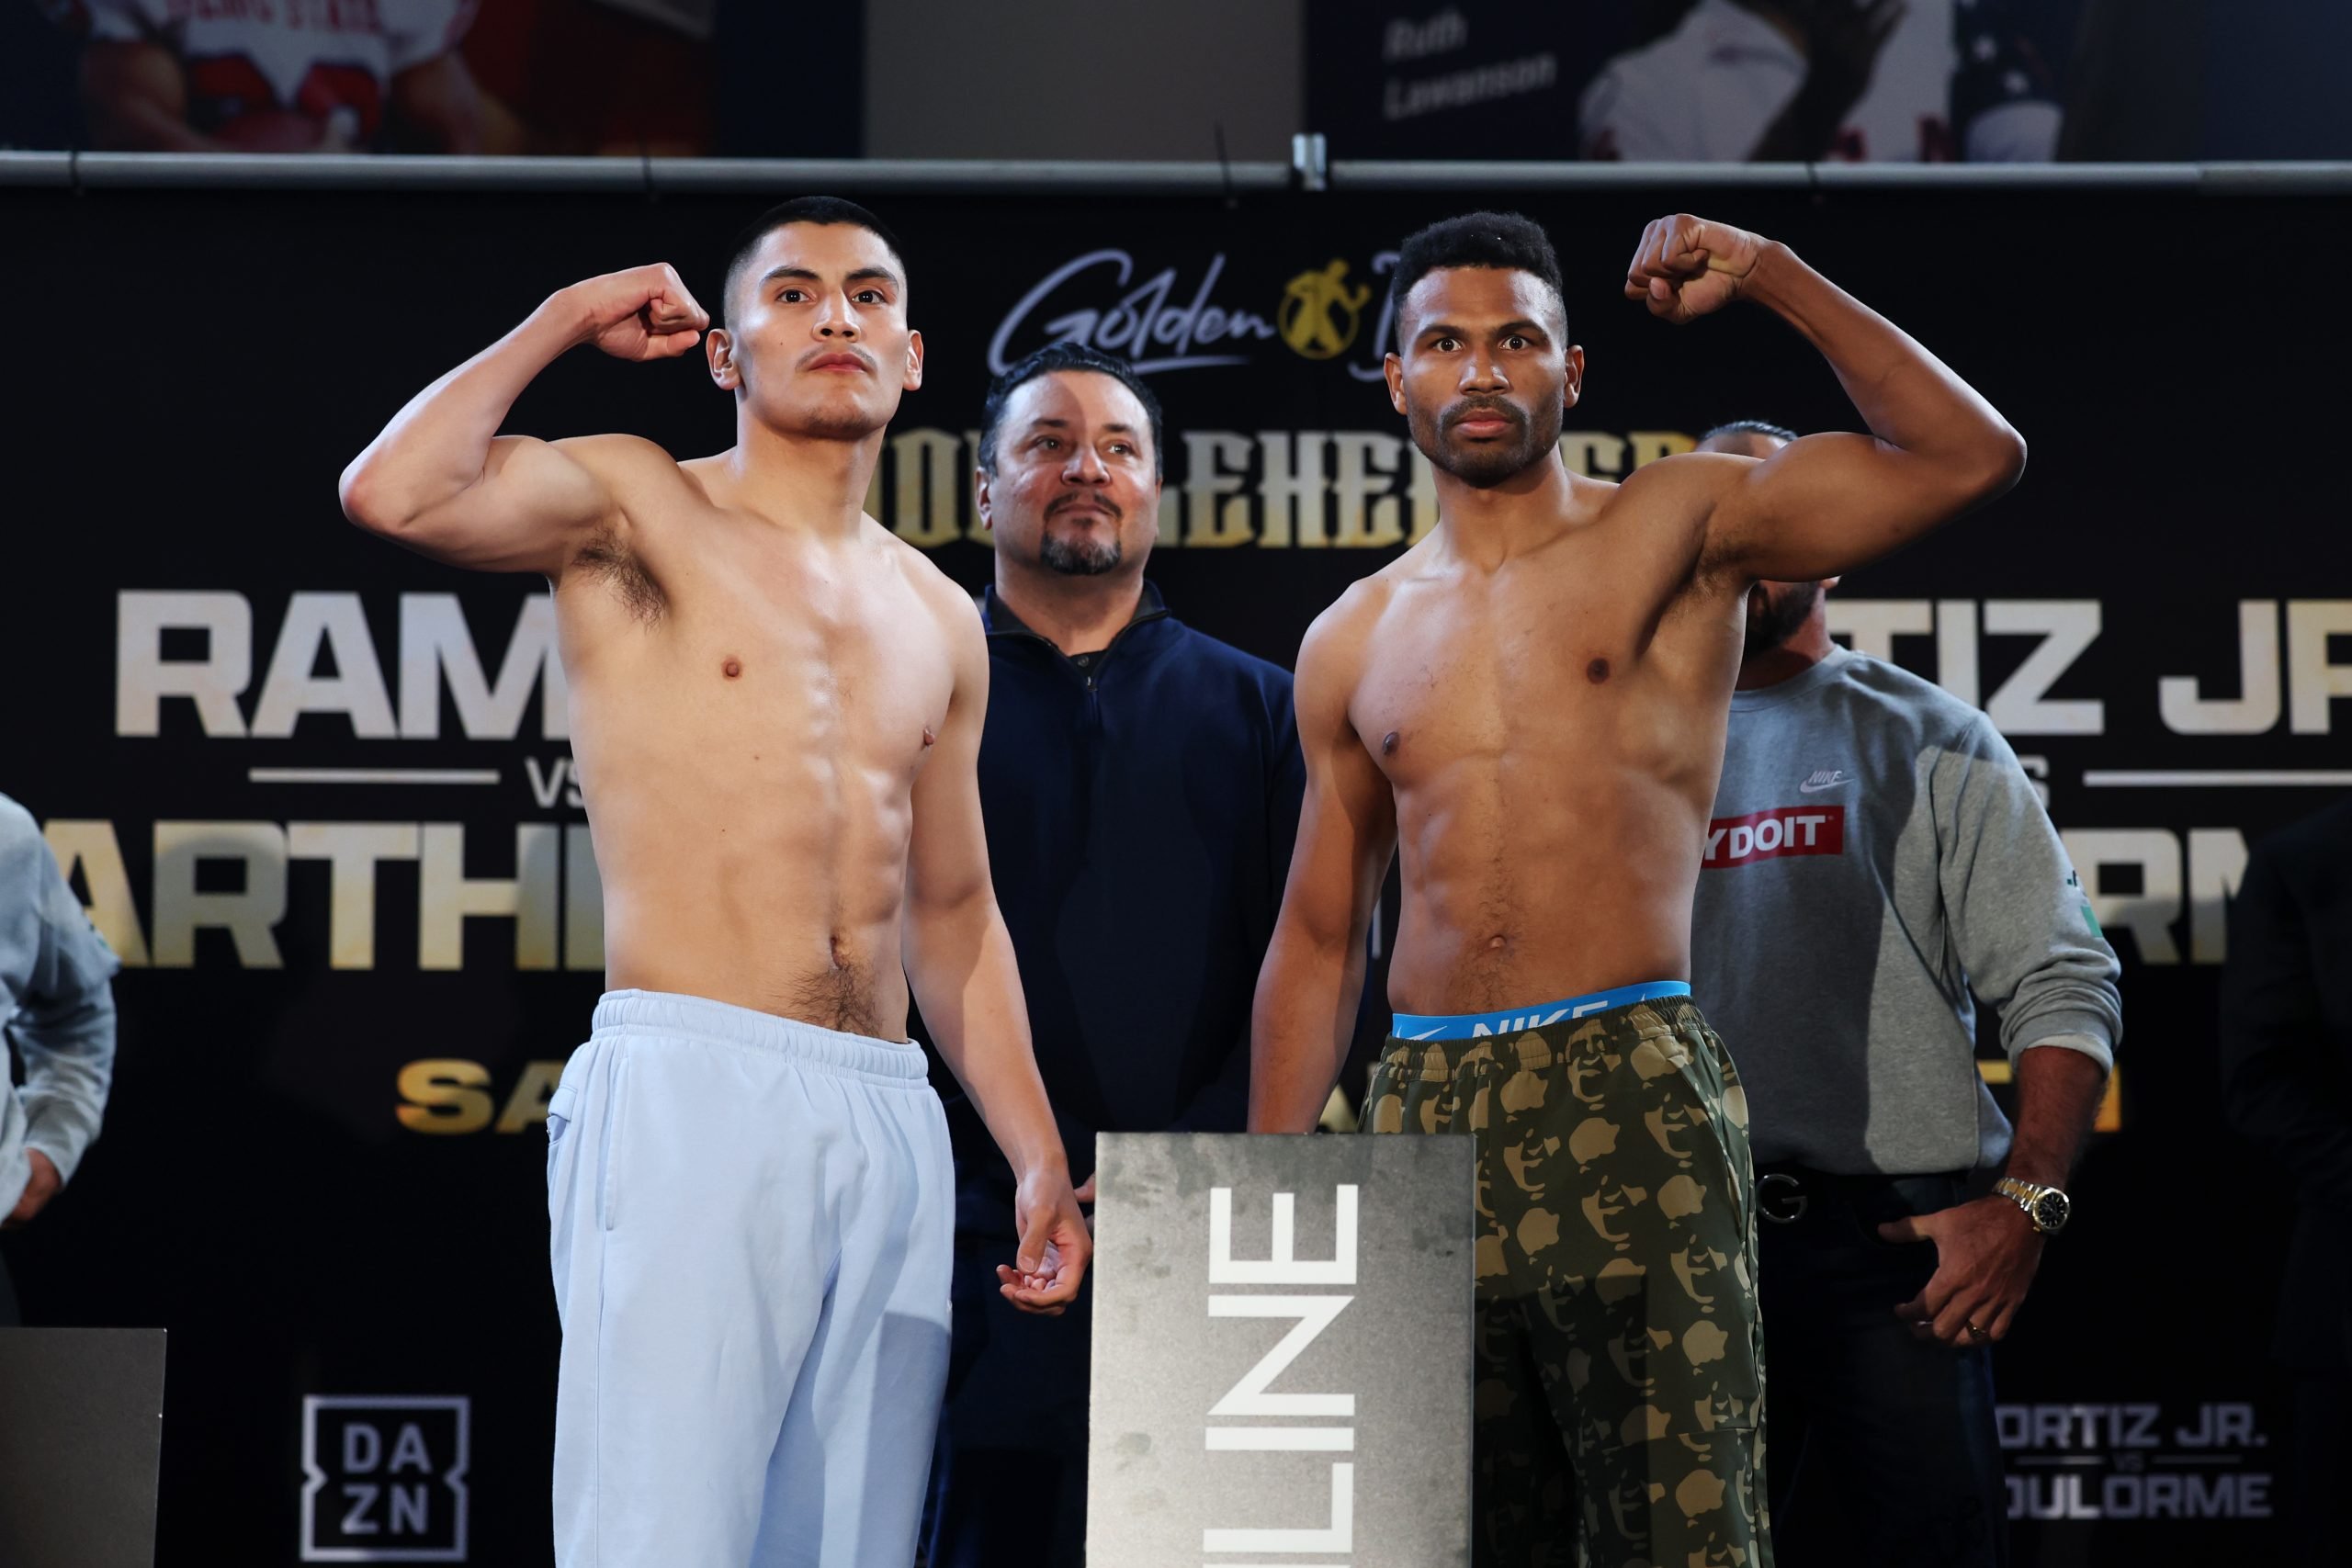 Vergil Ortiz weighs 155.6 pounds, Thomas Dulorme comes in a pound lighter